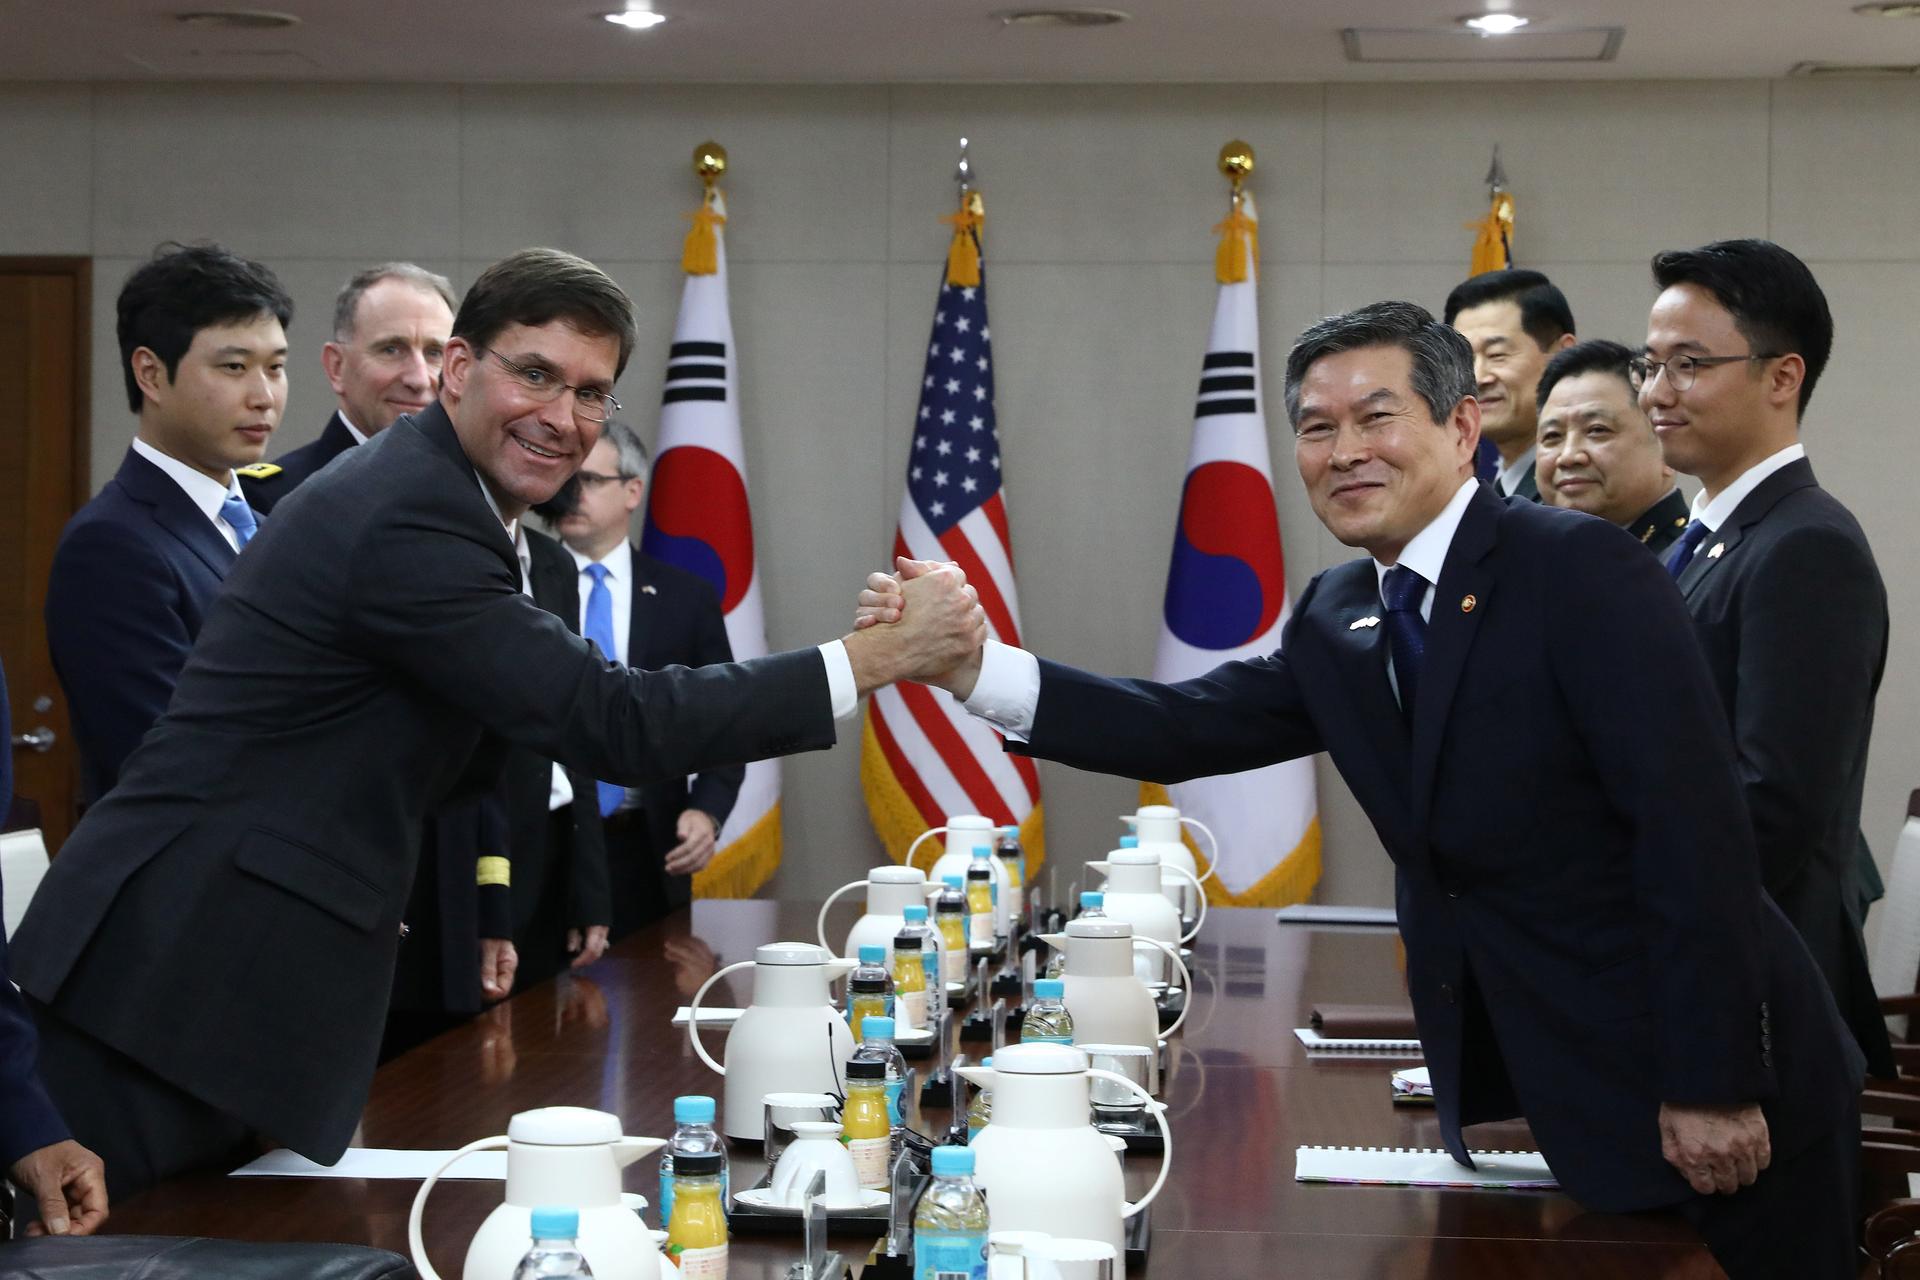 President Moon Jae-in shakes hands with US military wearing uniforms across a table